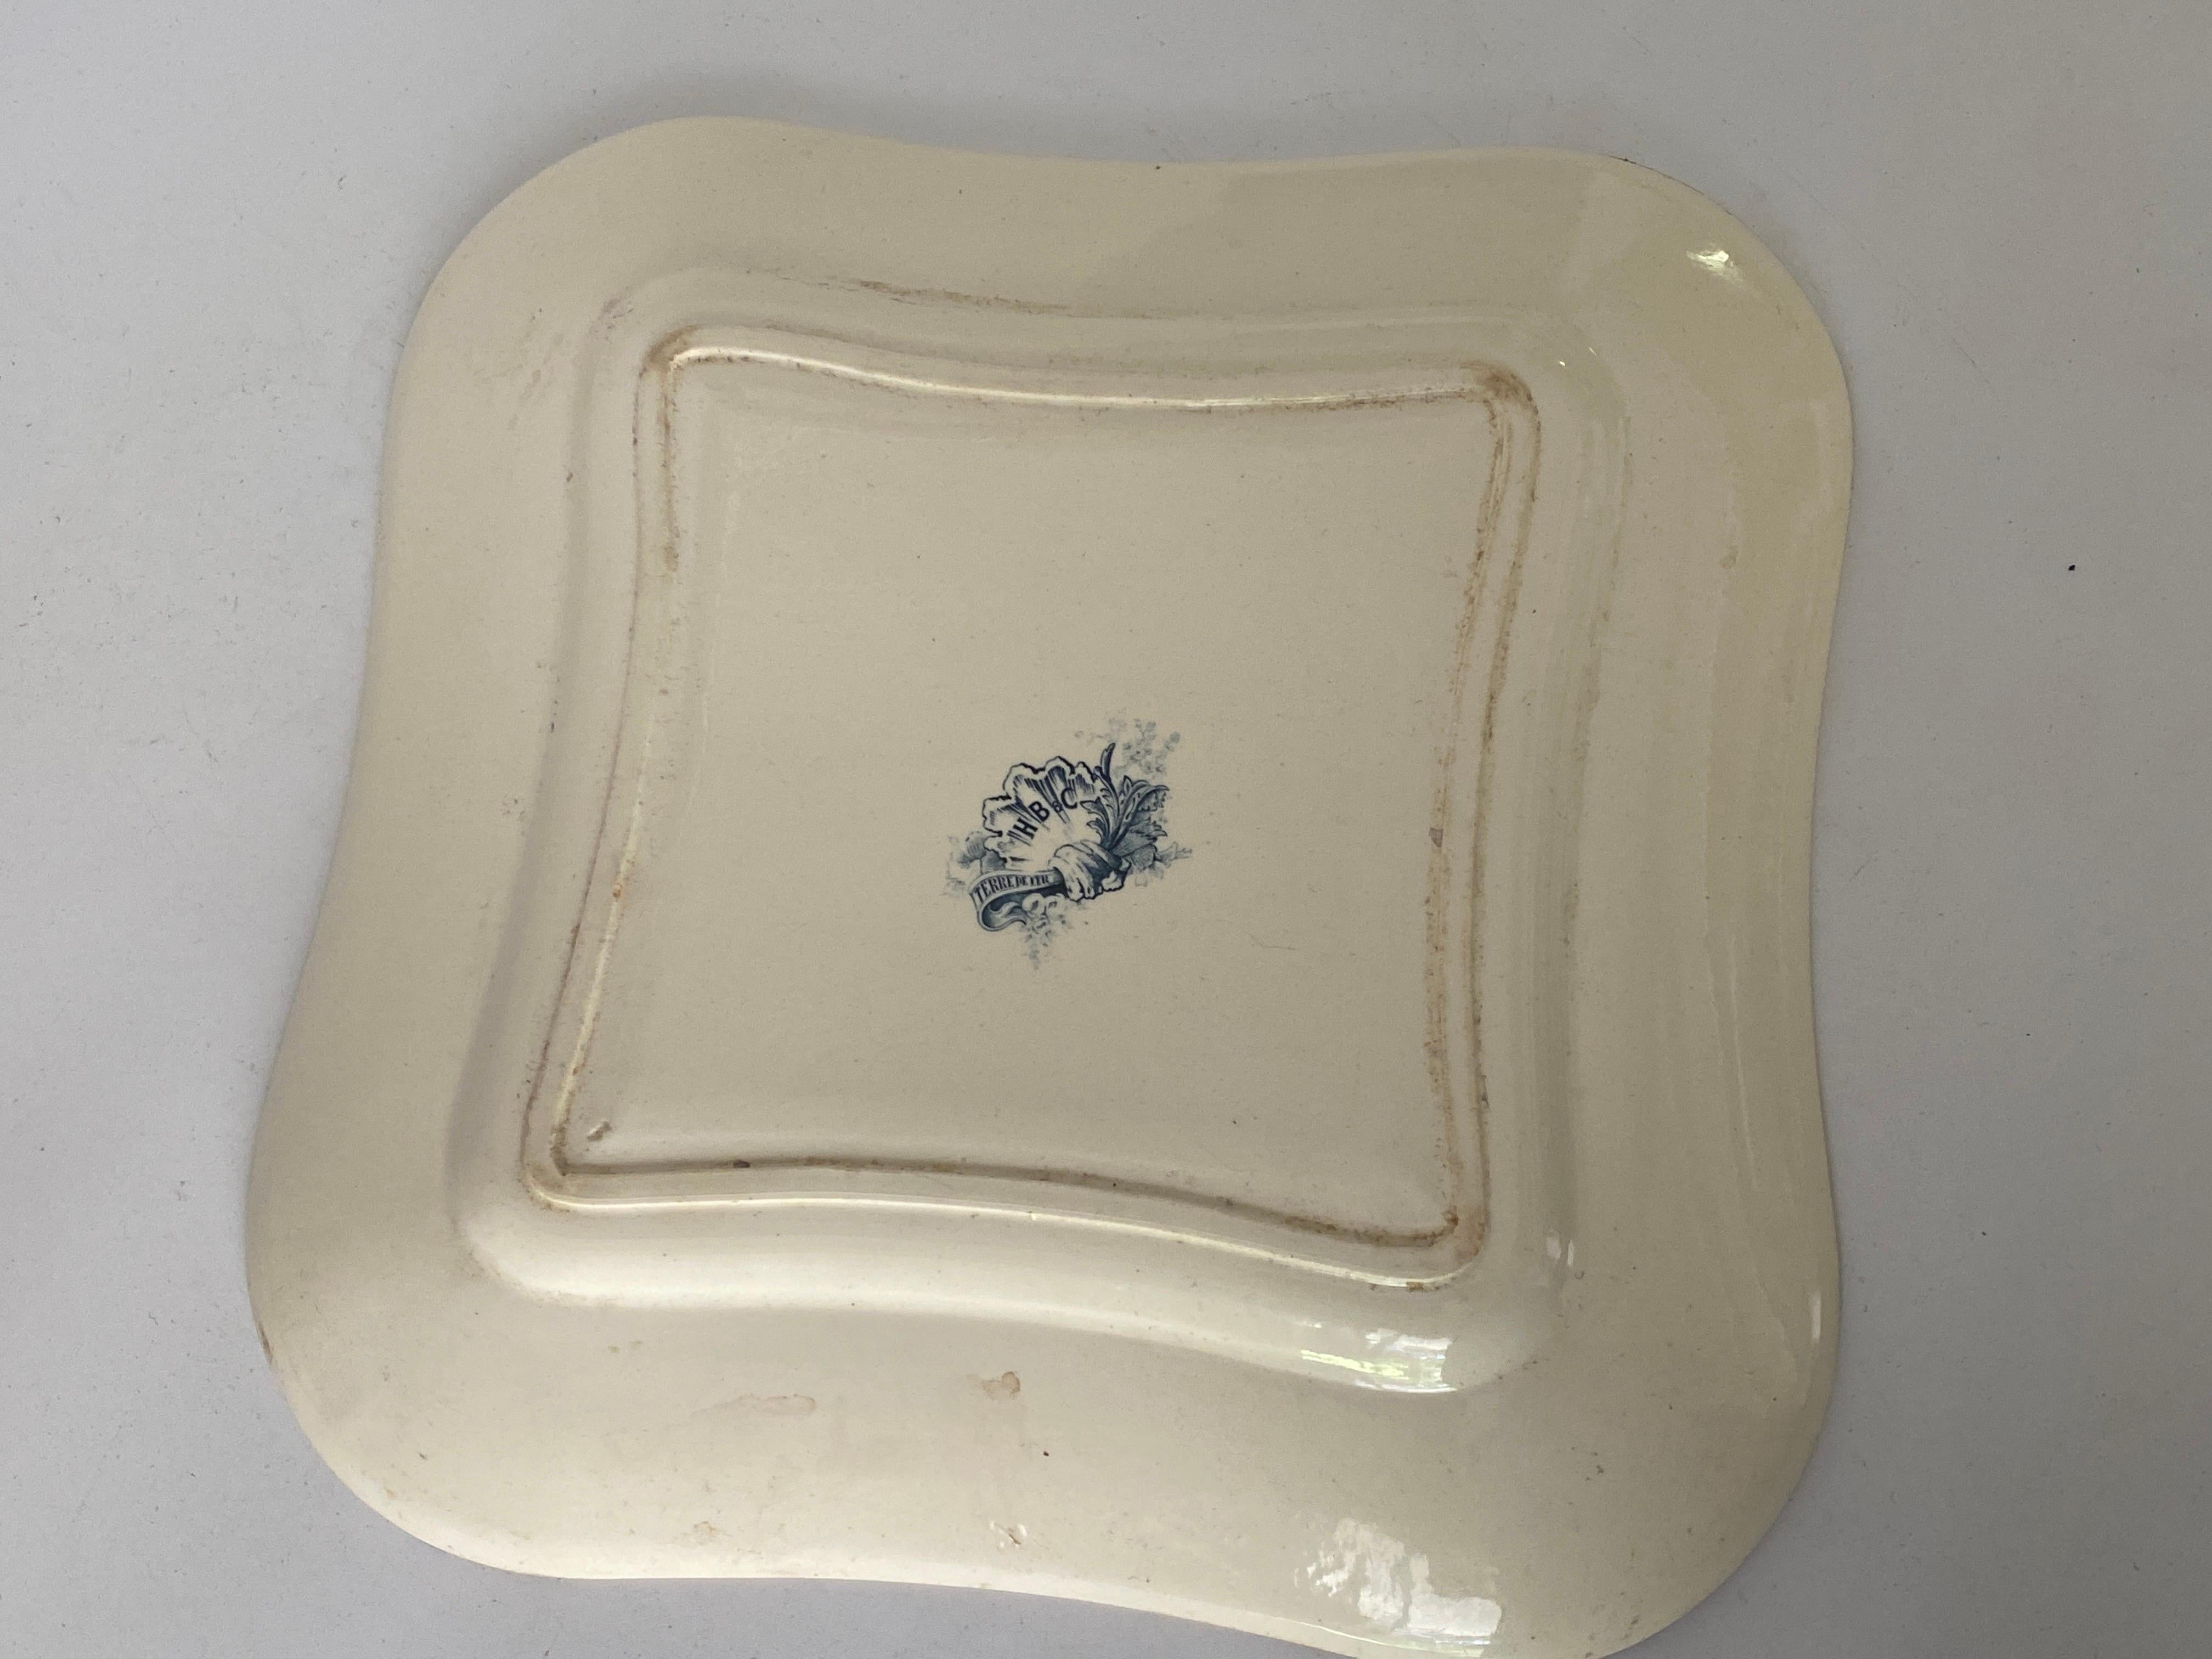 French Provincial Faience Dish by Terre de Fer with Flowers Decor France 19th Century Signed For Sale